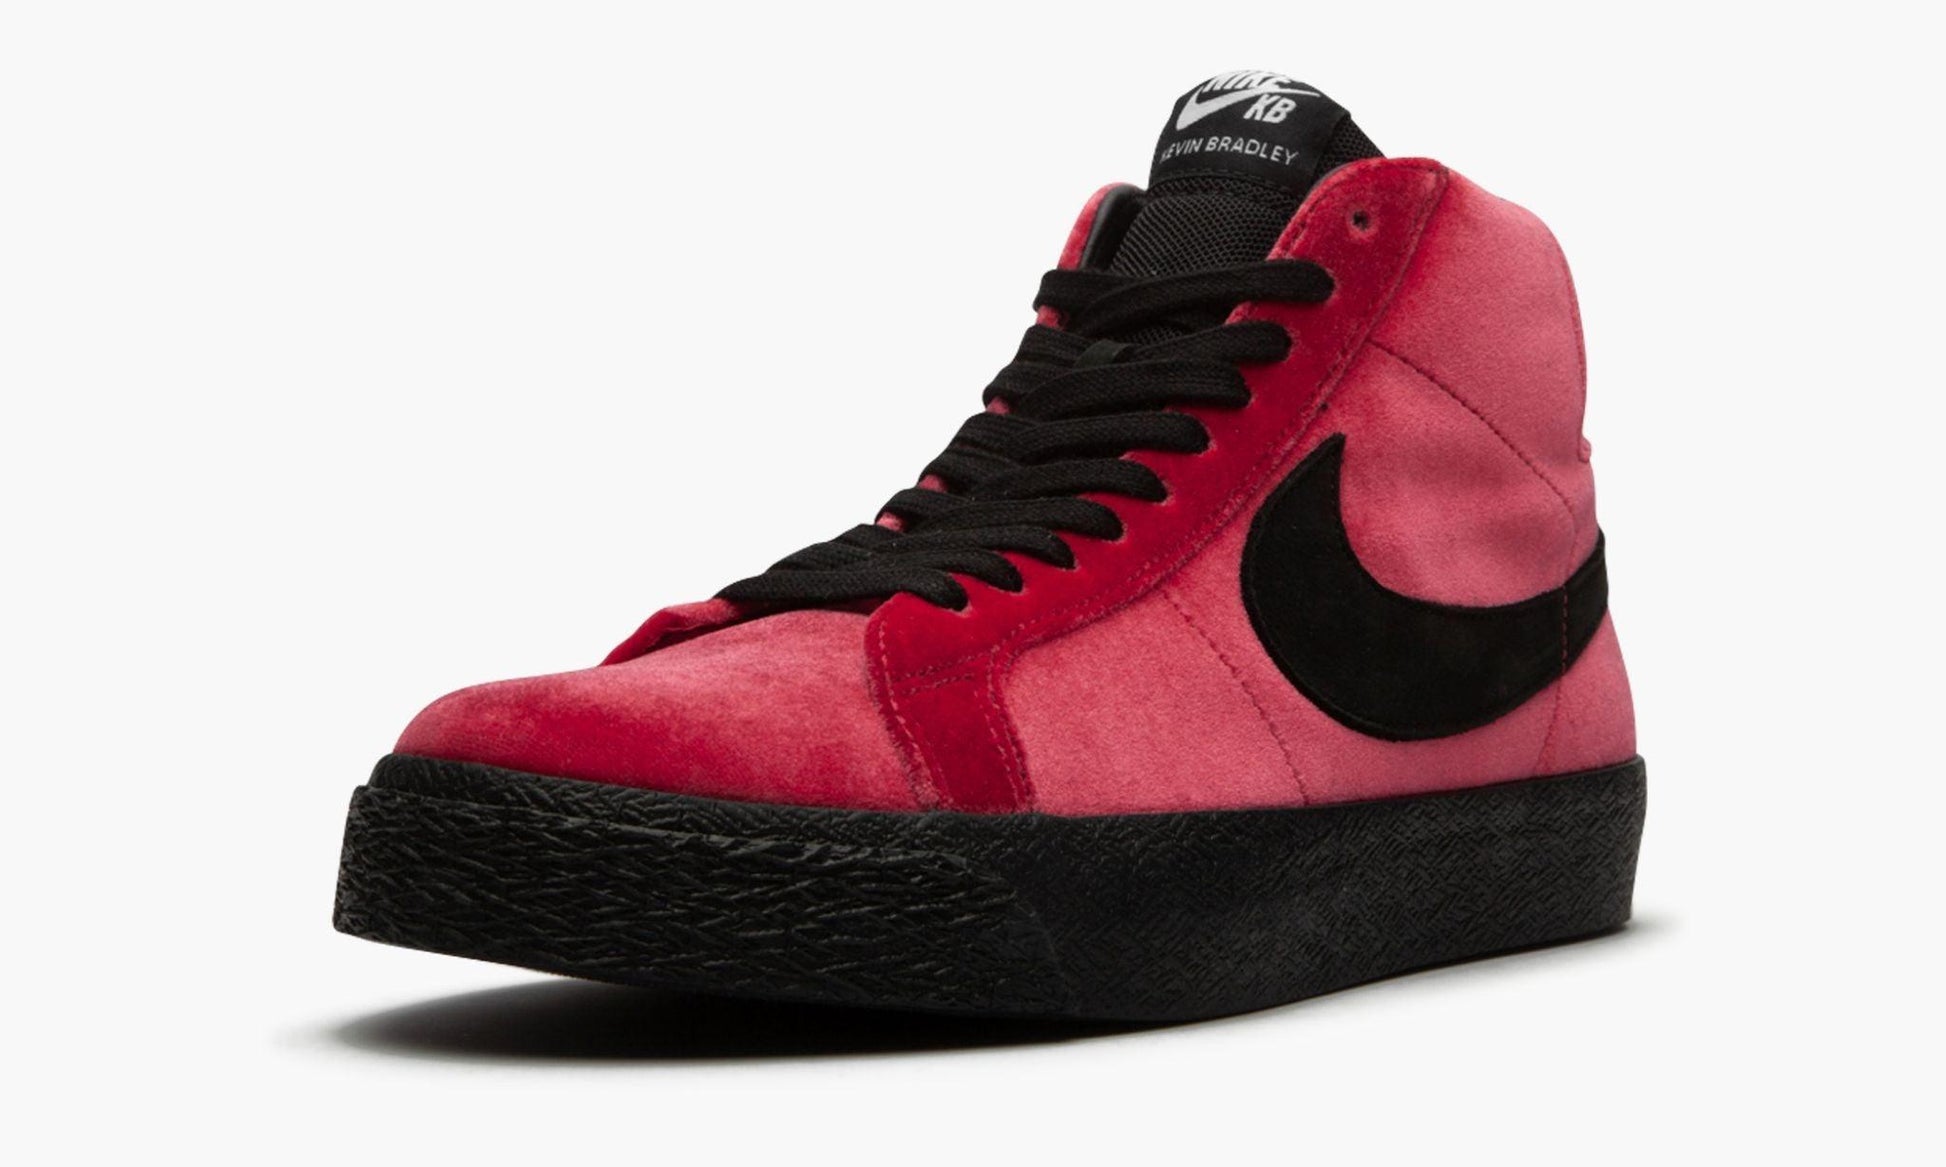 Nike SB Zoom Blazer Mid Kevin and Hell Men's Running Shoes - CADEAUME